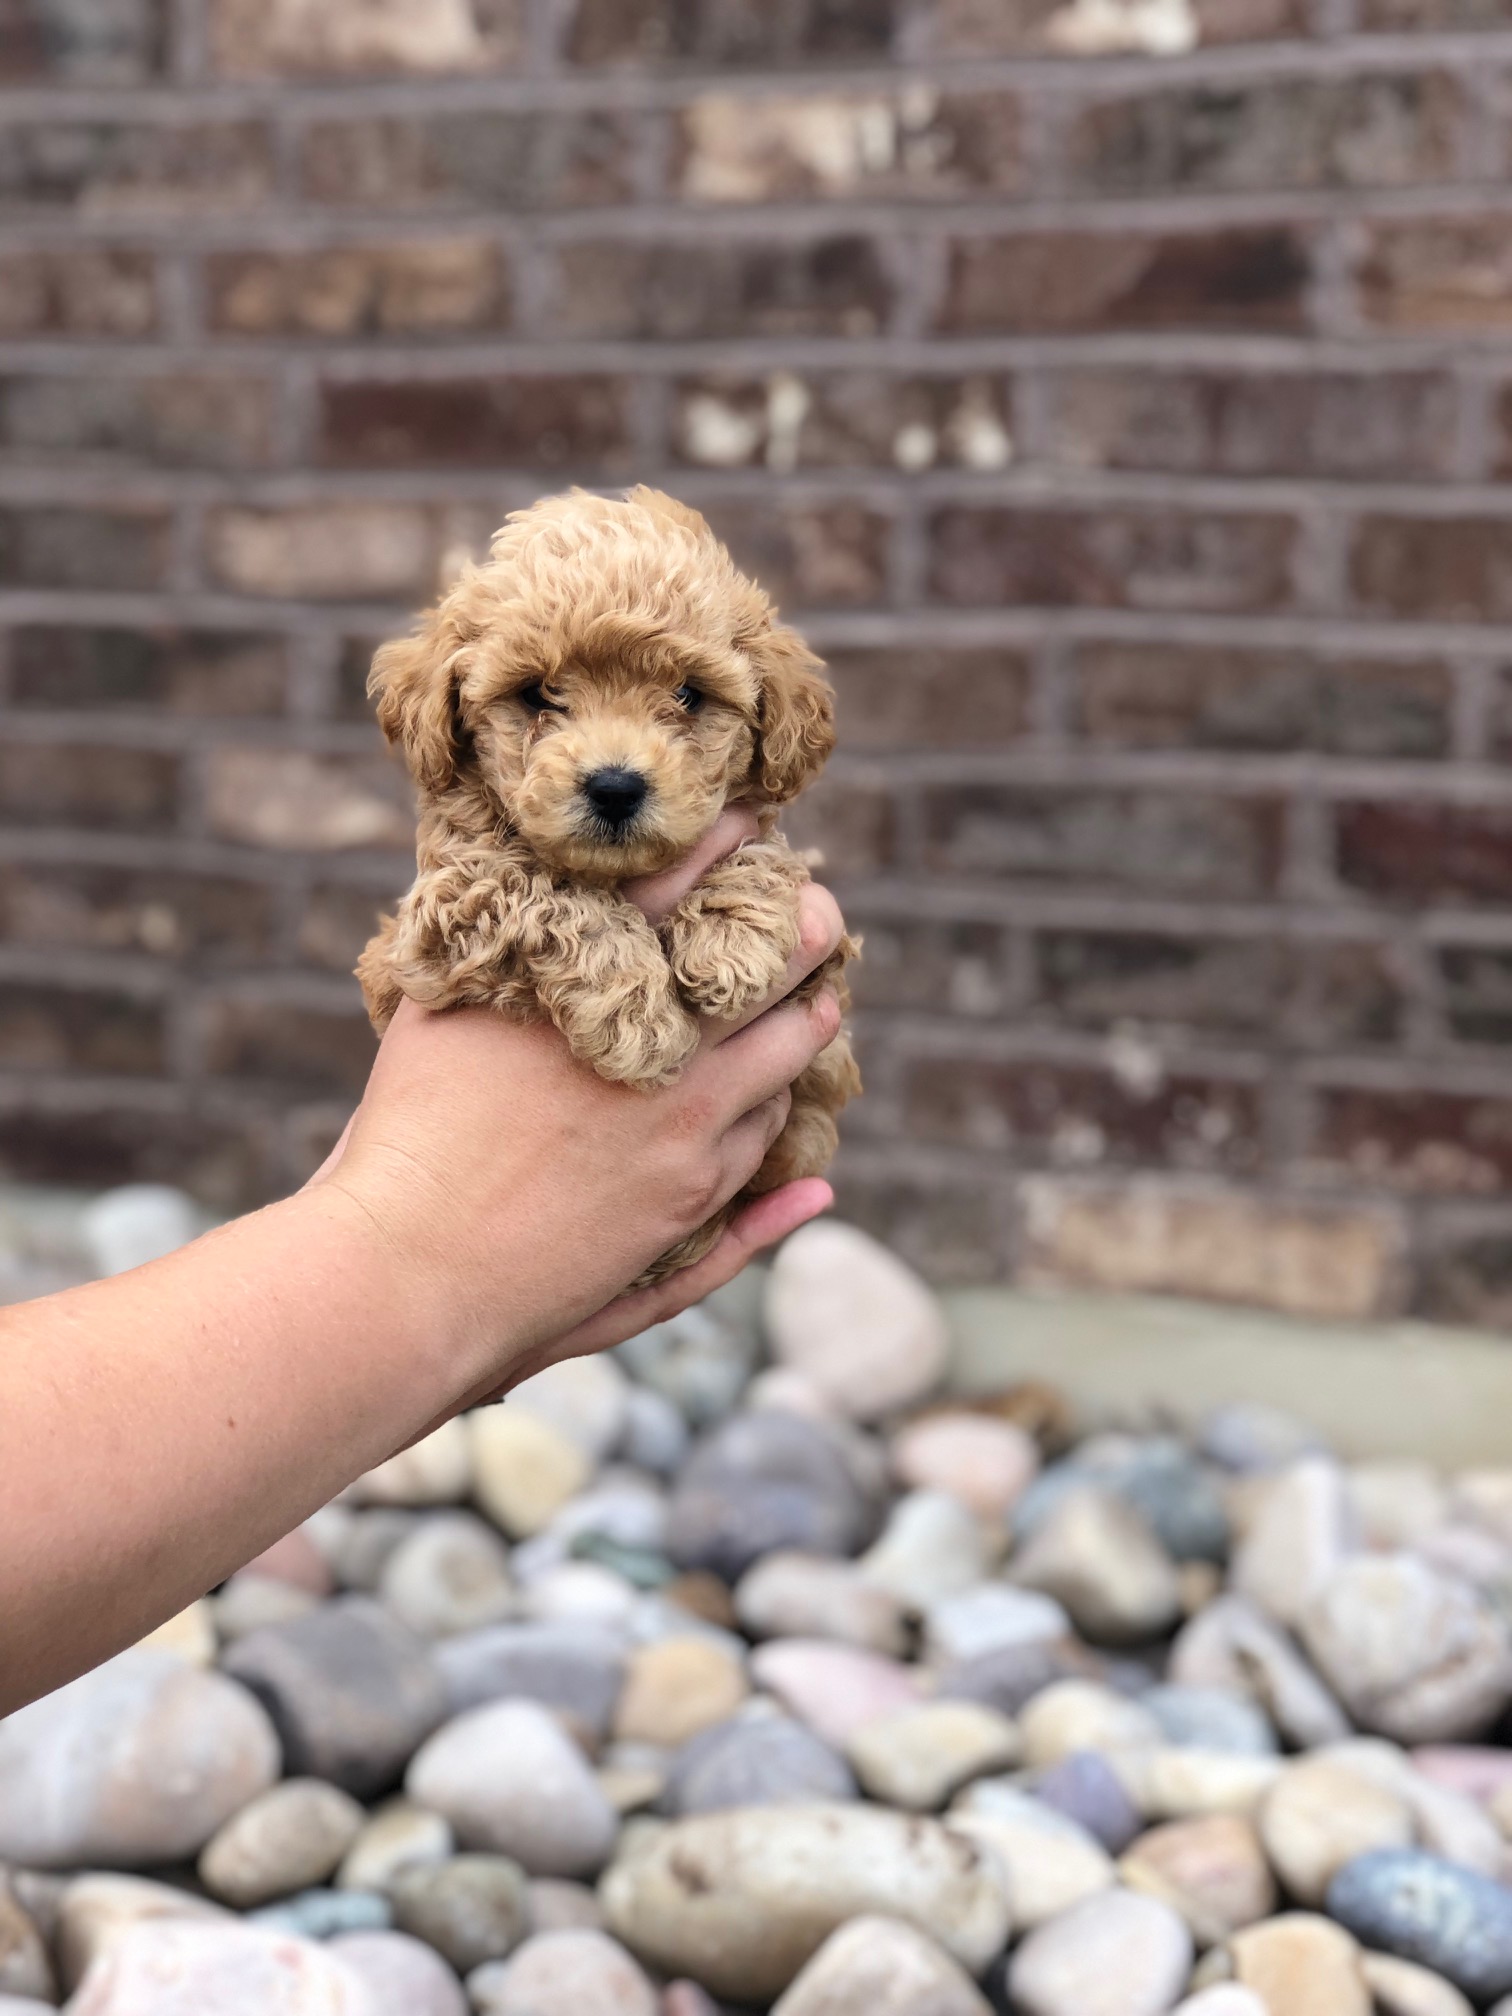 A person gently cradling a small brown poodle puppy against a backdrop of a sturdy brick wall.